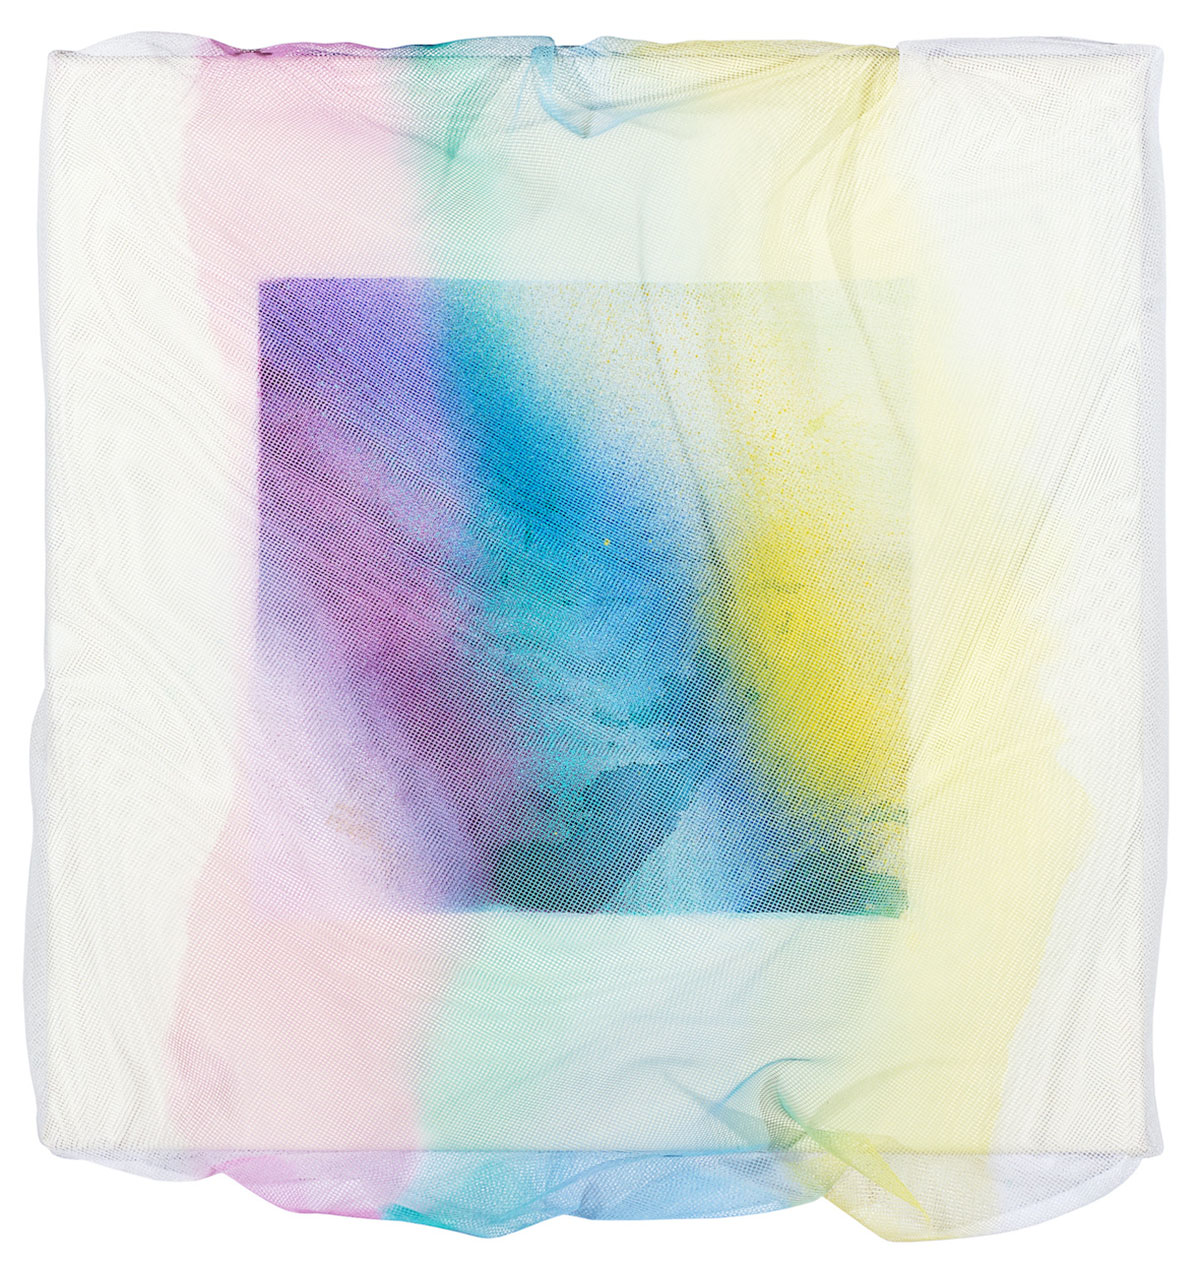 Prism, 2021, mixed media on canvas and polyester, 42x42 cm, Photo: Marko Mäkinen